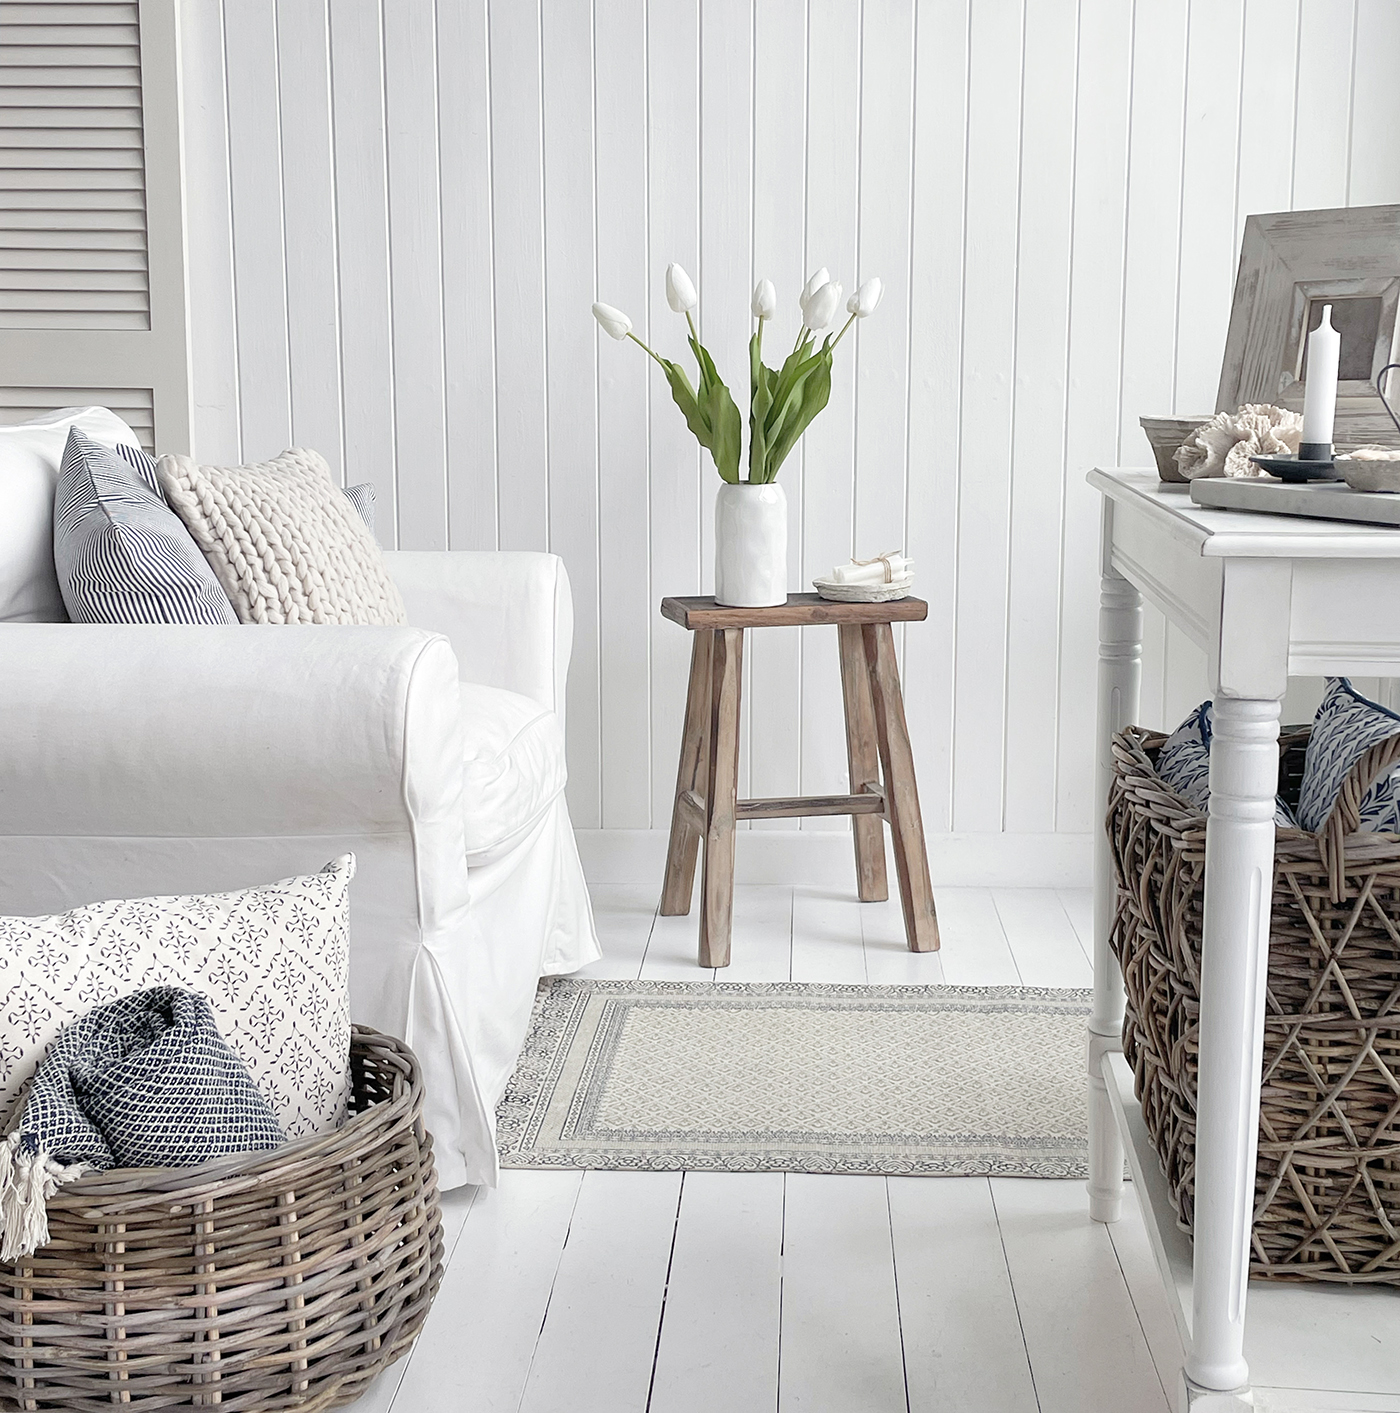 New England living room furniture and home interiors. baskets, cushions, throws, artificial white tulips to create a beautiful relaxed but sophisticated area